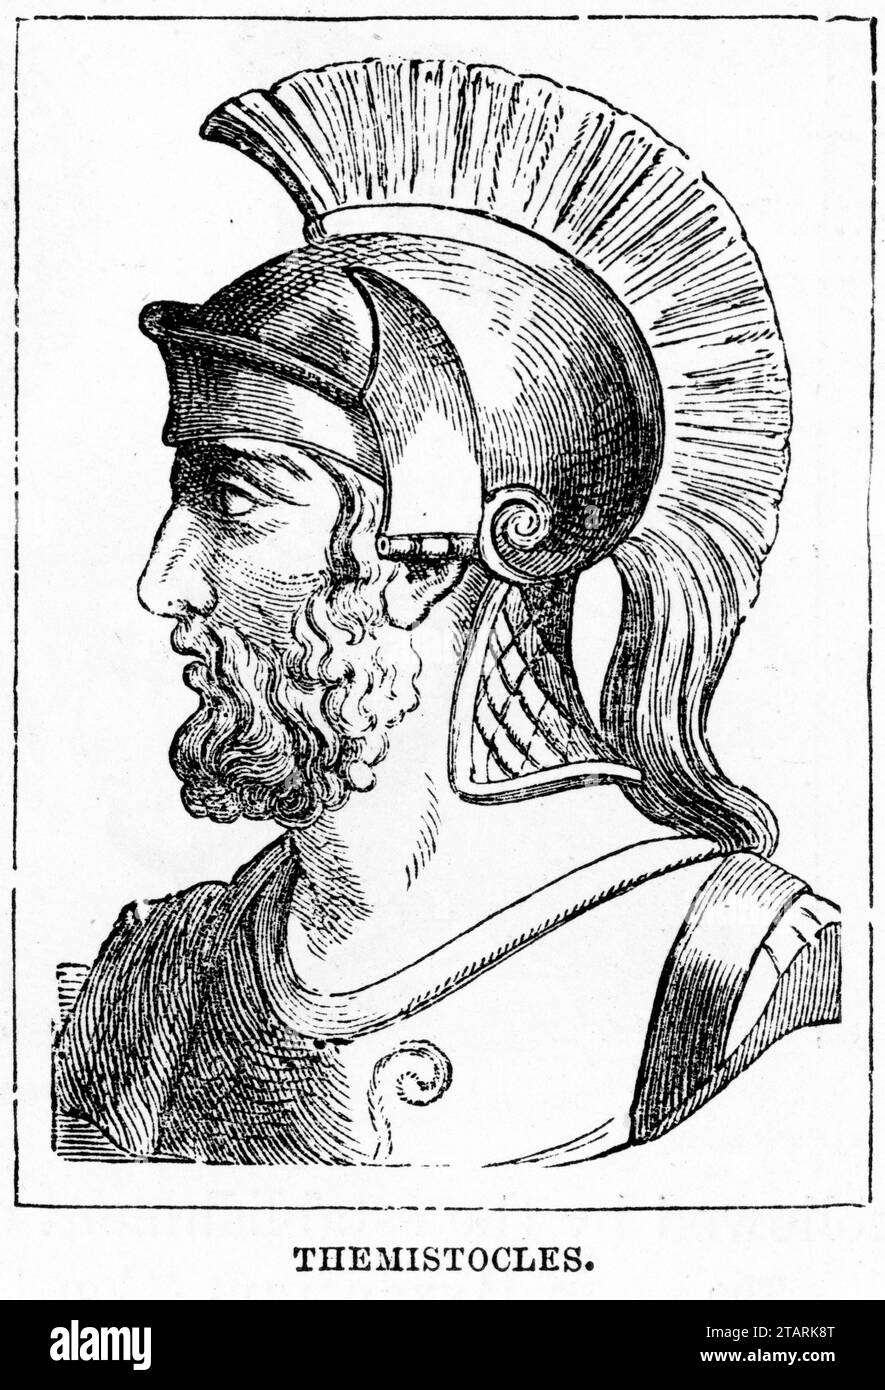 Portrait of Themistocles (c. 524 – c. 459 BC) an Athenian politician and general. He was one of a new breed of non-aristocratic politicians who rose to prominence in the early years of the Athenian democracy. Stock Photo